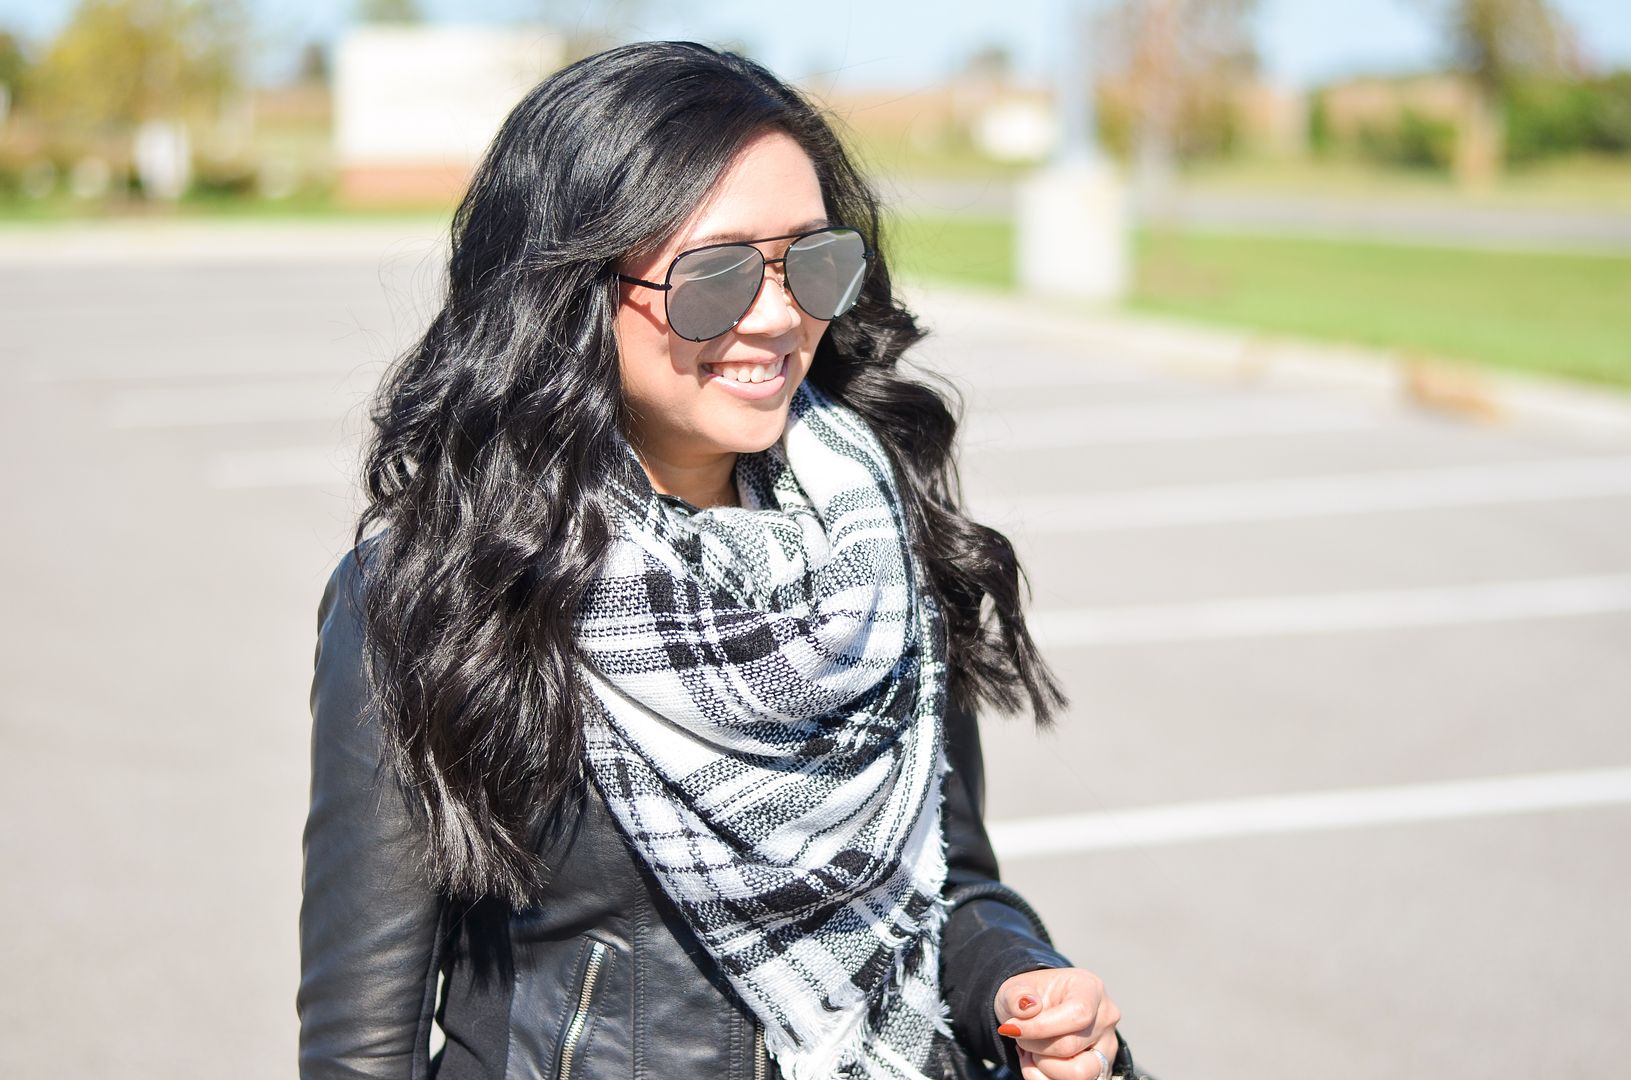 More Pieces of Me | St. Louis Fashion Blog: Moto and lace